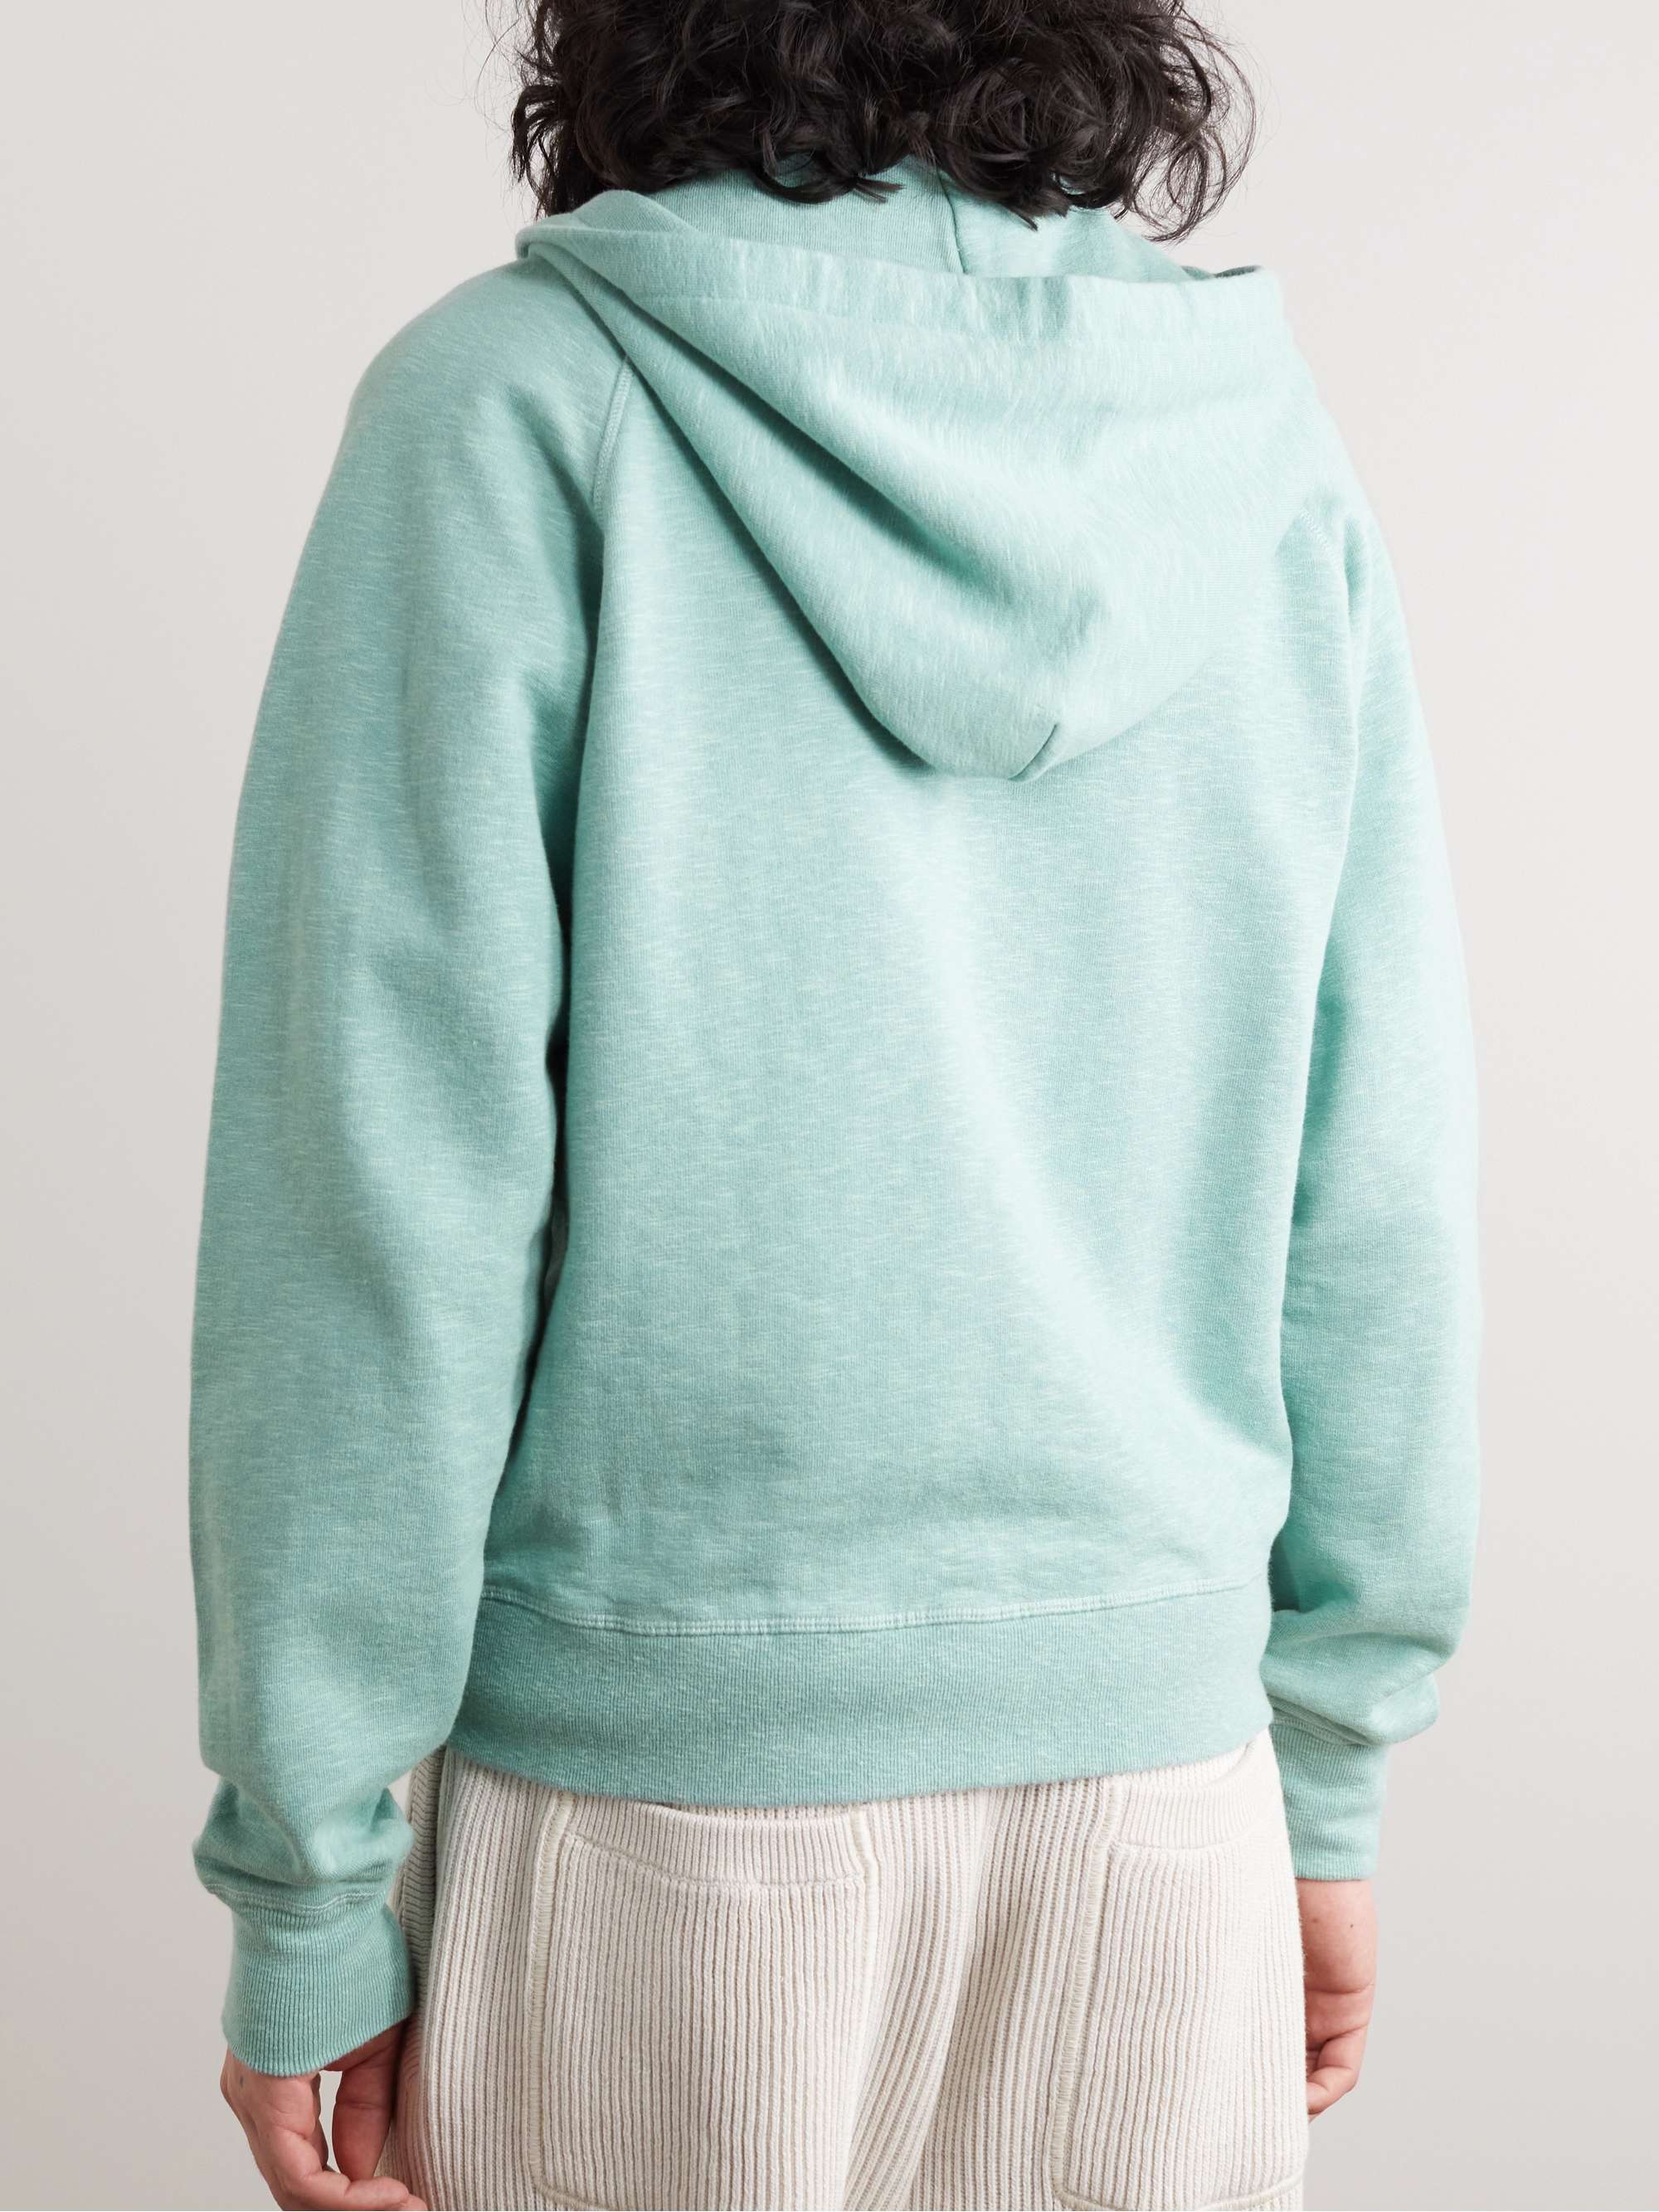 TOM FORD Brushed Cotton-Blend Jersey Zip-Up Hoodie